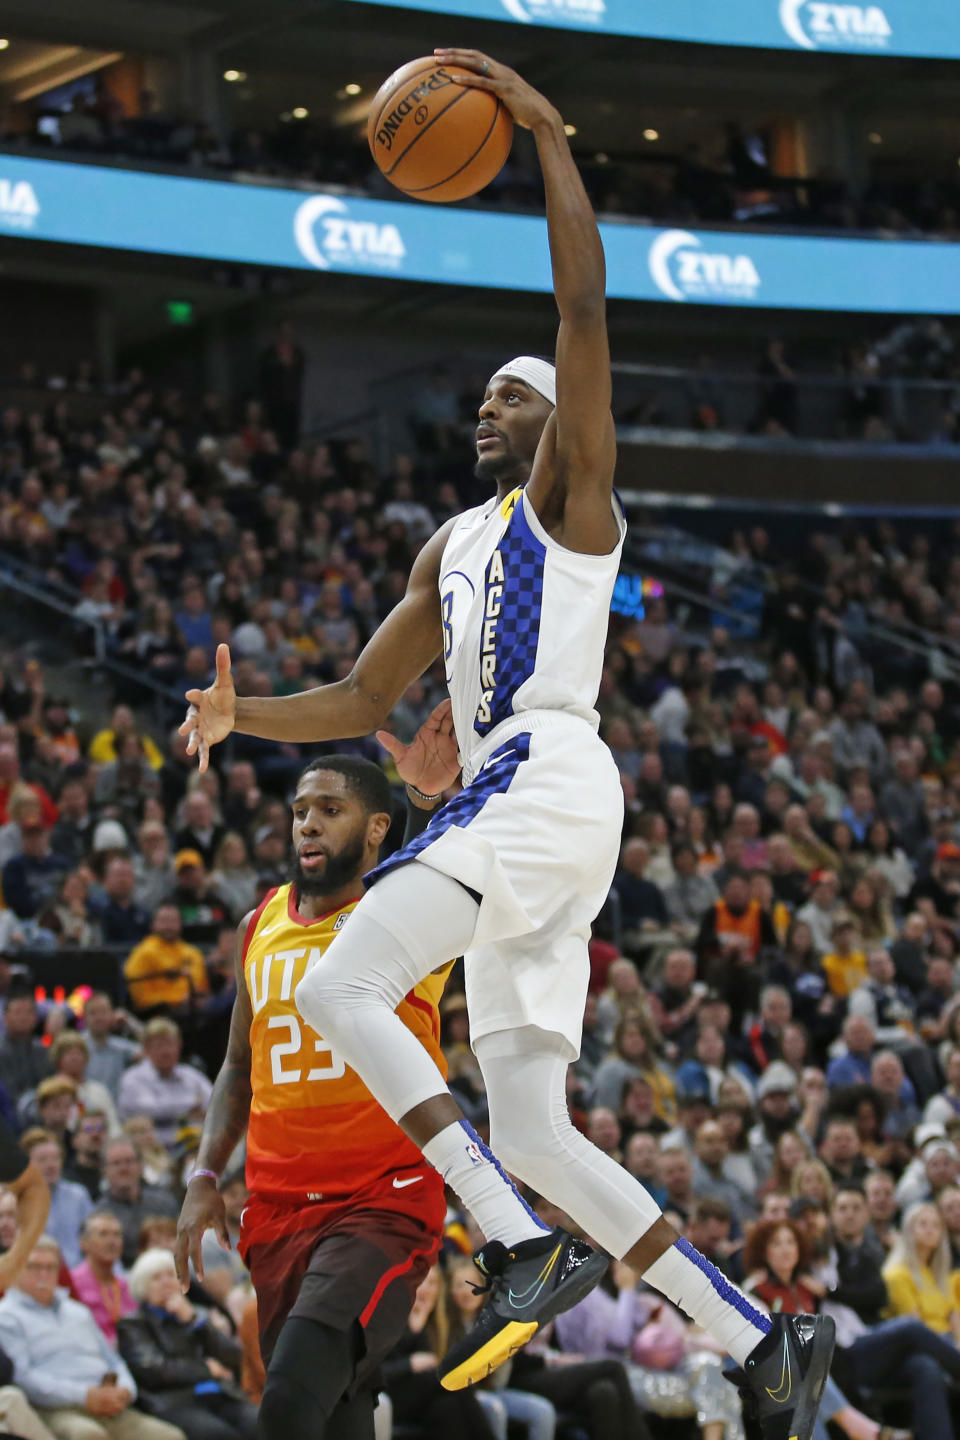 Indiana Pacers forward Justin Holiday, left, goes to the basket as Utah Jazz forward Royce O'Neale (23) defends in the first half of an NBA basketball game Monday, Jan. 20, 2020, in Salt Lake City. (AP Photo/Rick Bowmer)